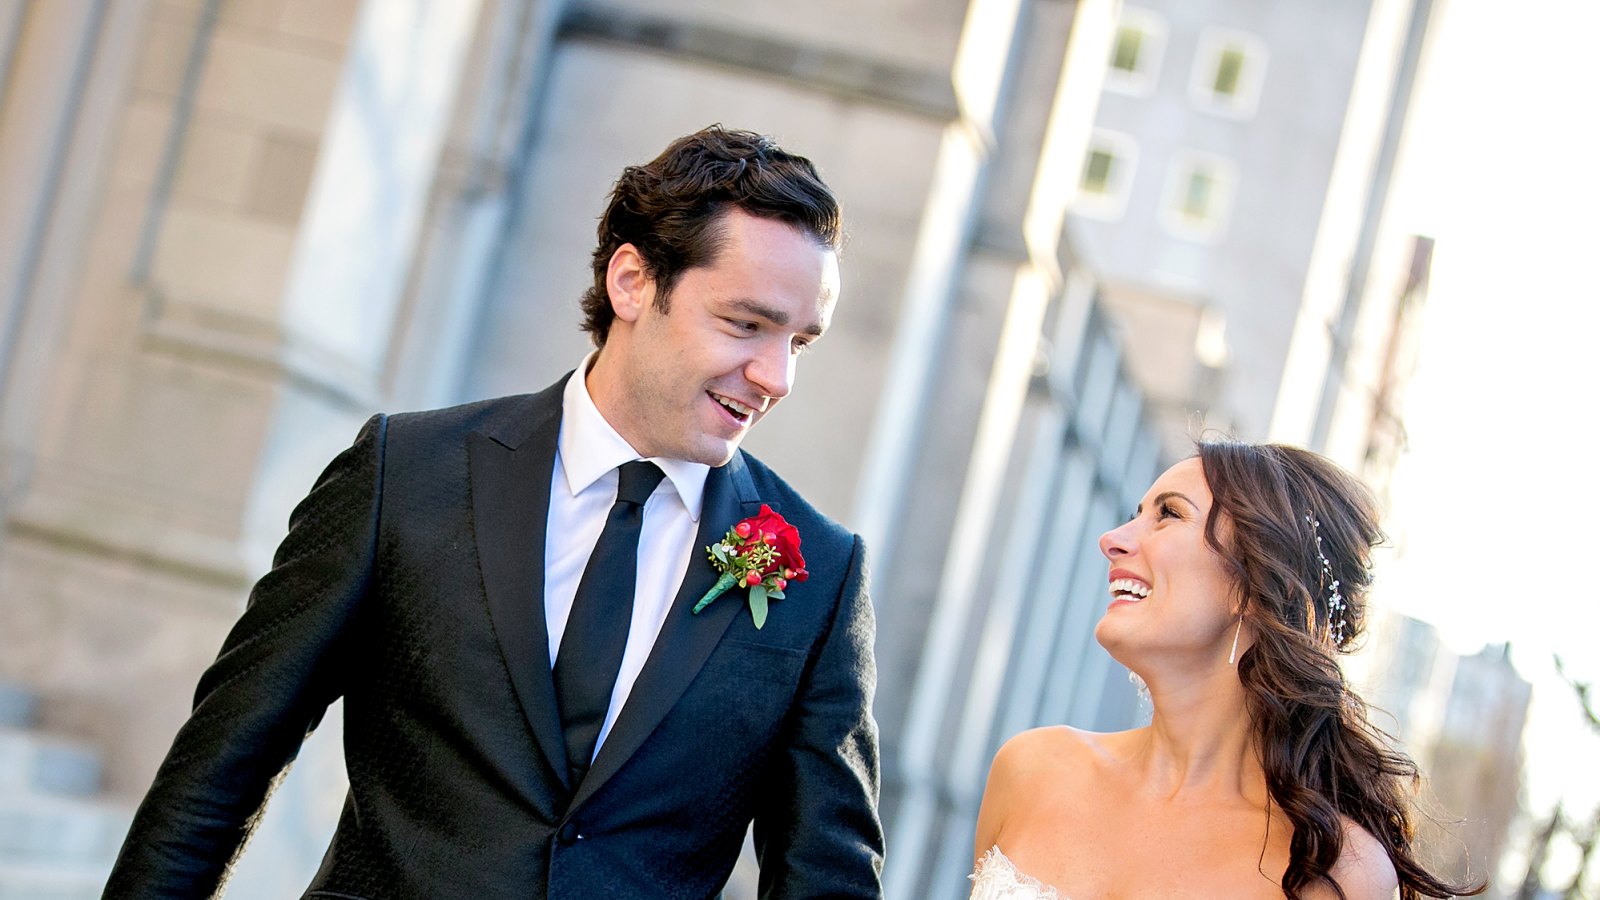 Laura Benanti, Supergirl and Nashville actress, was married in a private ceremony at Riverside Church in NYC on Nov. 15th.